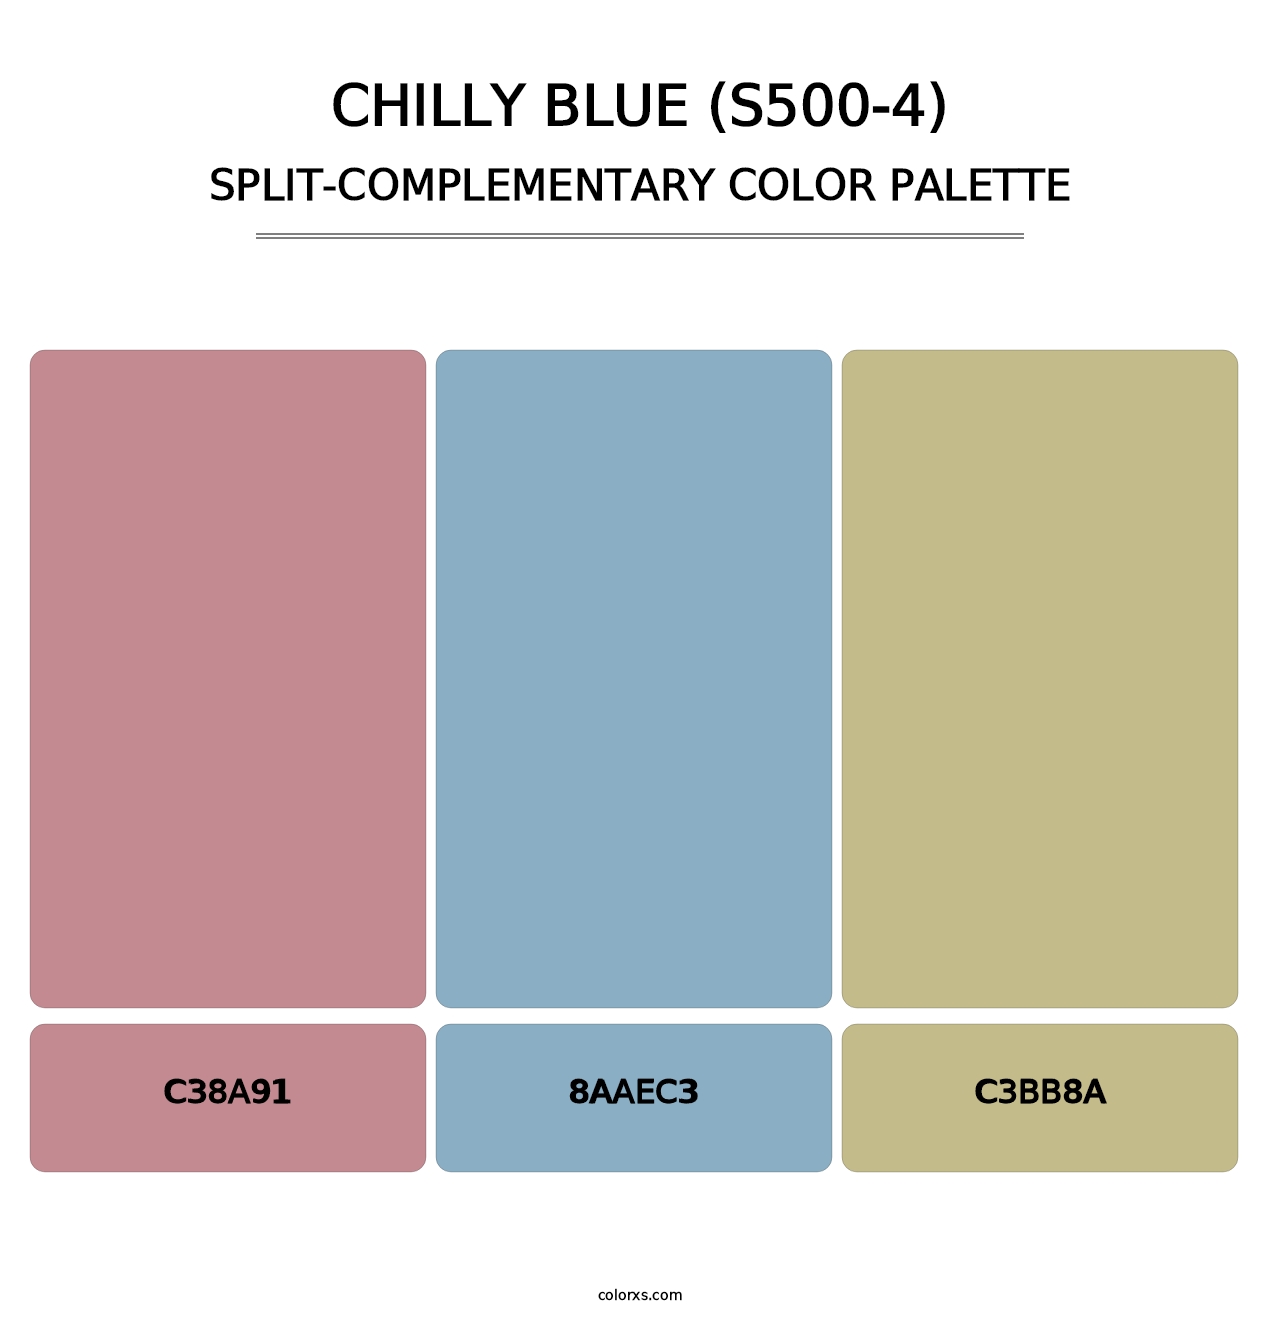 Chilly Blue (S500-4) - Split-Complementary Color Palette